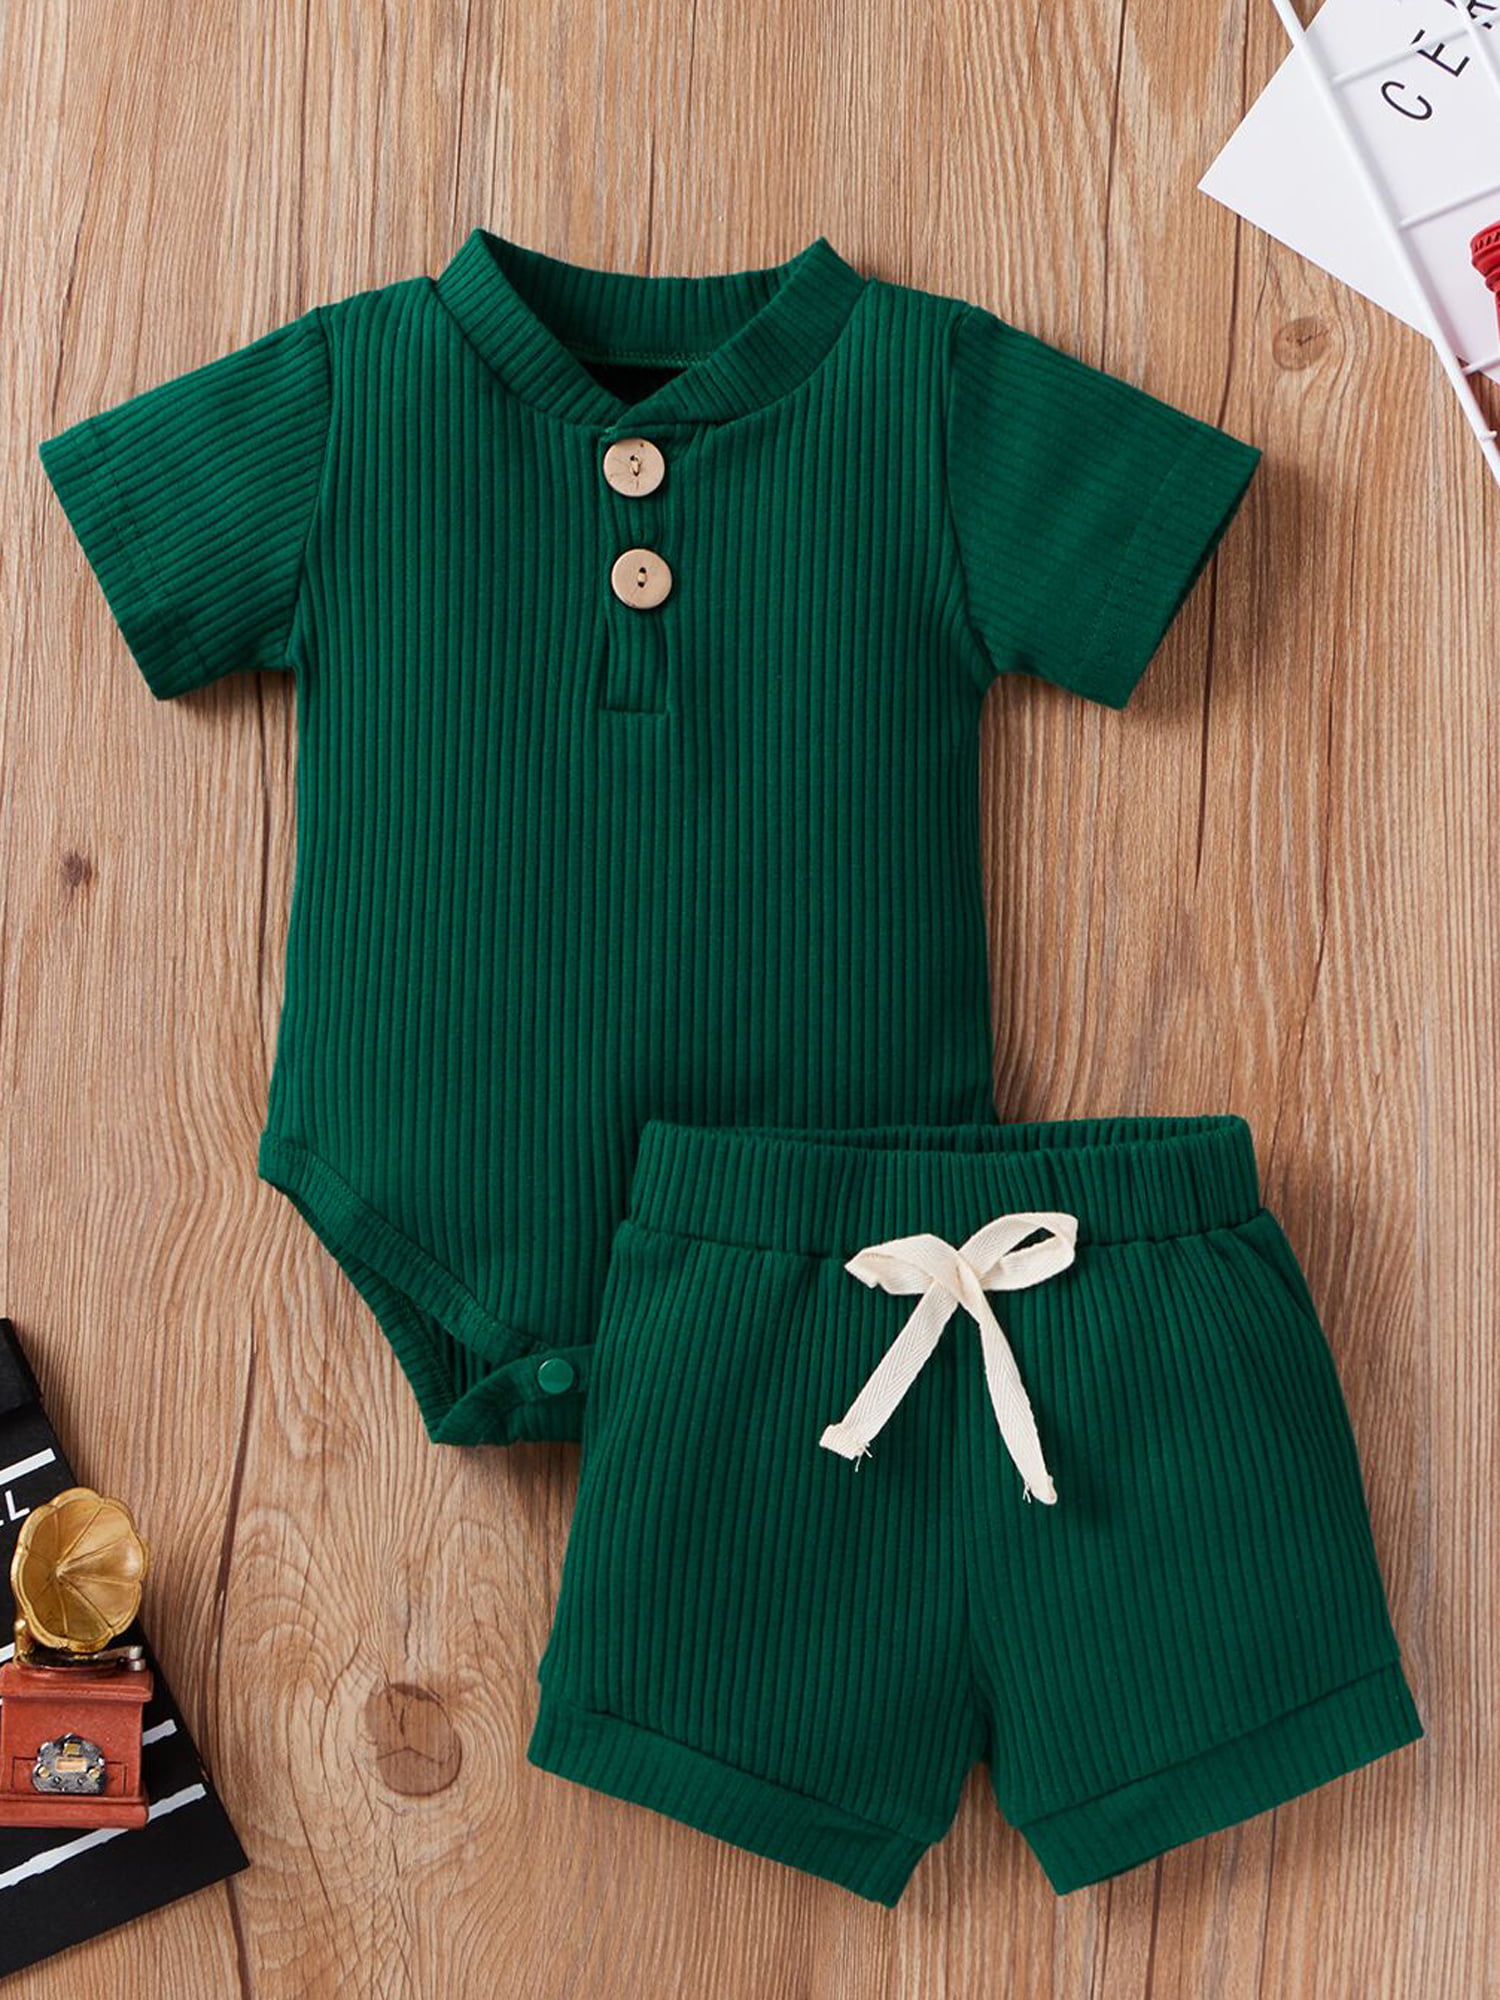 Details about   BABY LIME GREEN POLO ONE PIECE NEWBORN NEW